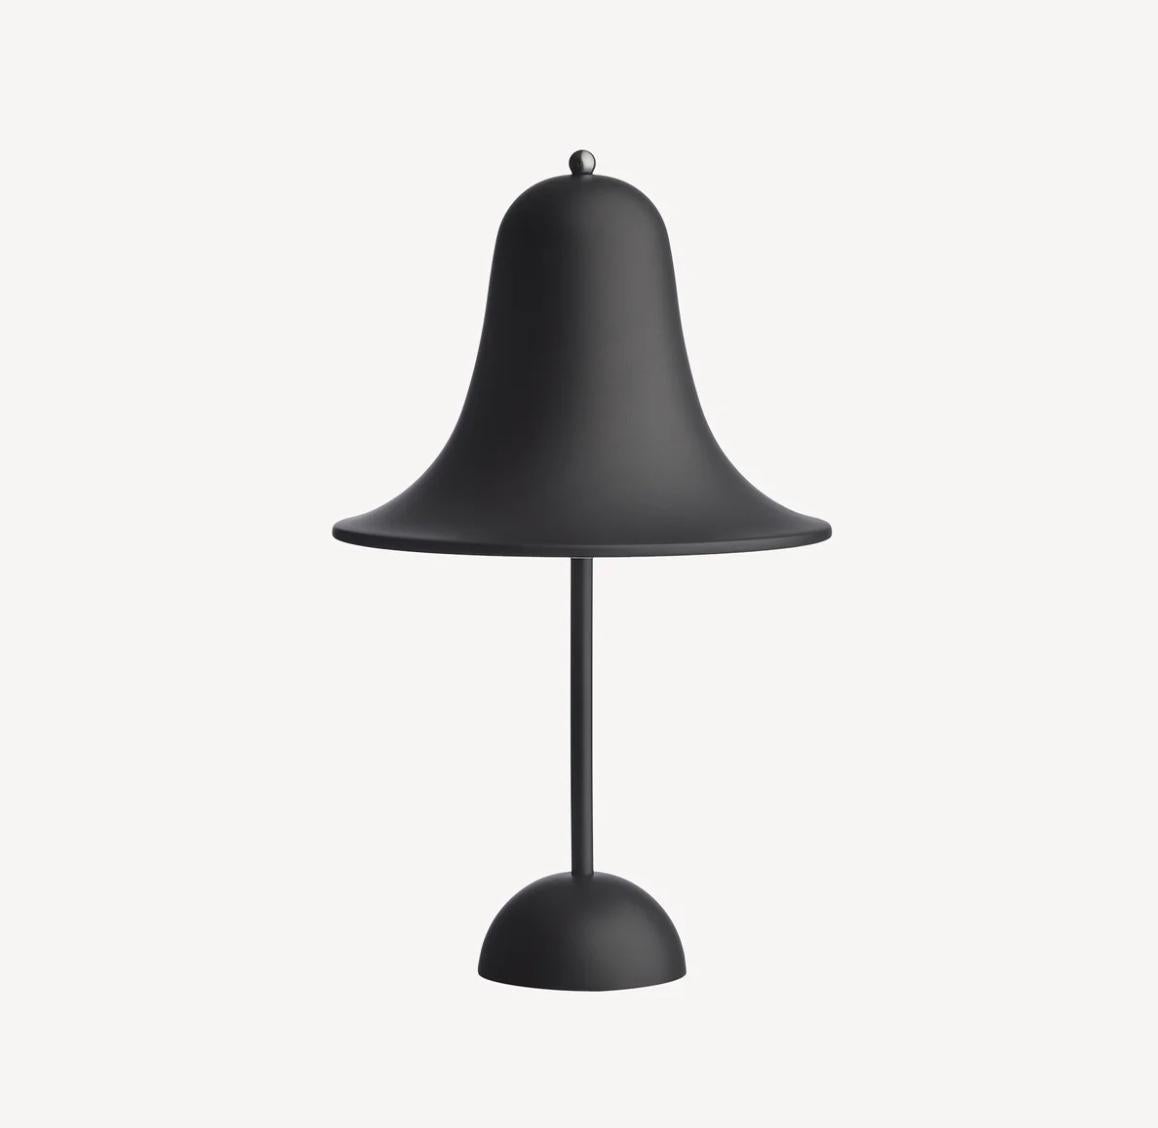 Verner Panton 'Pantop Portable' table lamp in 'Matt Black' for Verpan. Designed in 1980. New, current production.

This is a versatile smaller and wireless version of the 'Pantop' table lamp, usb-chargeable. 

The elegant Pantop line was